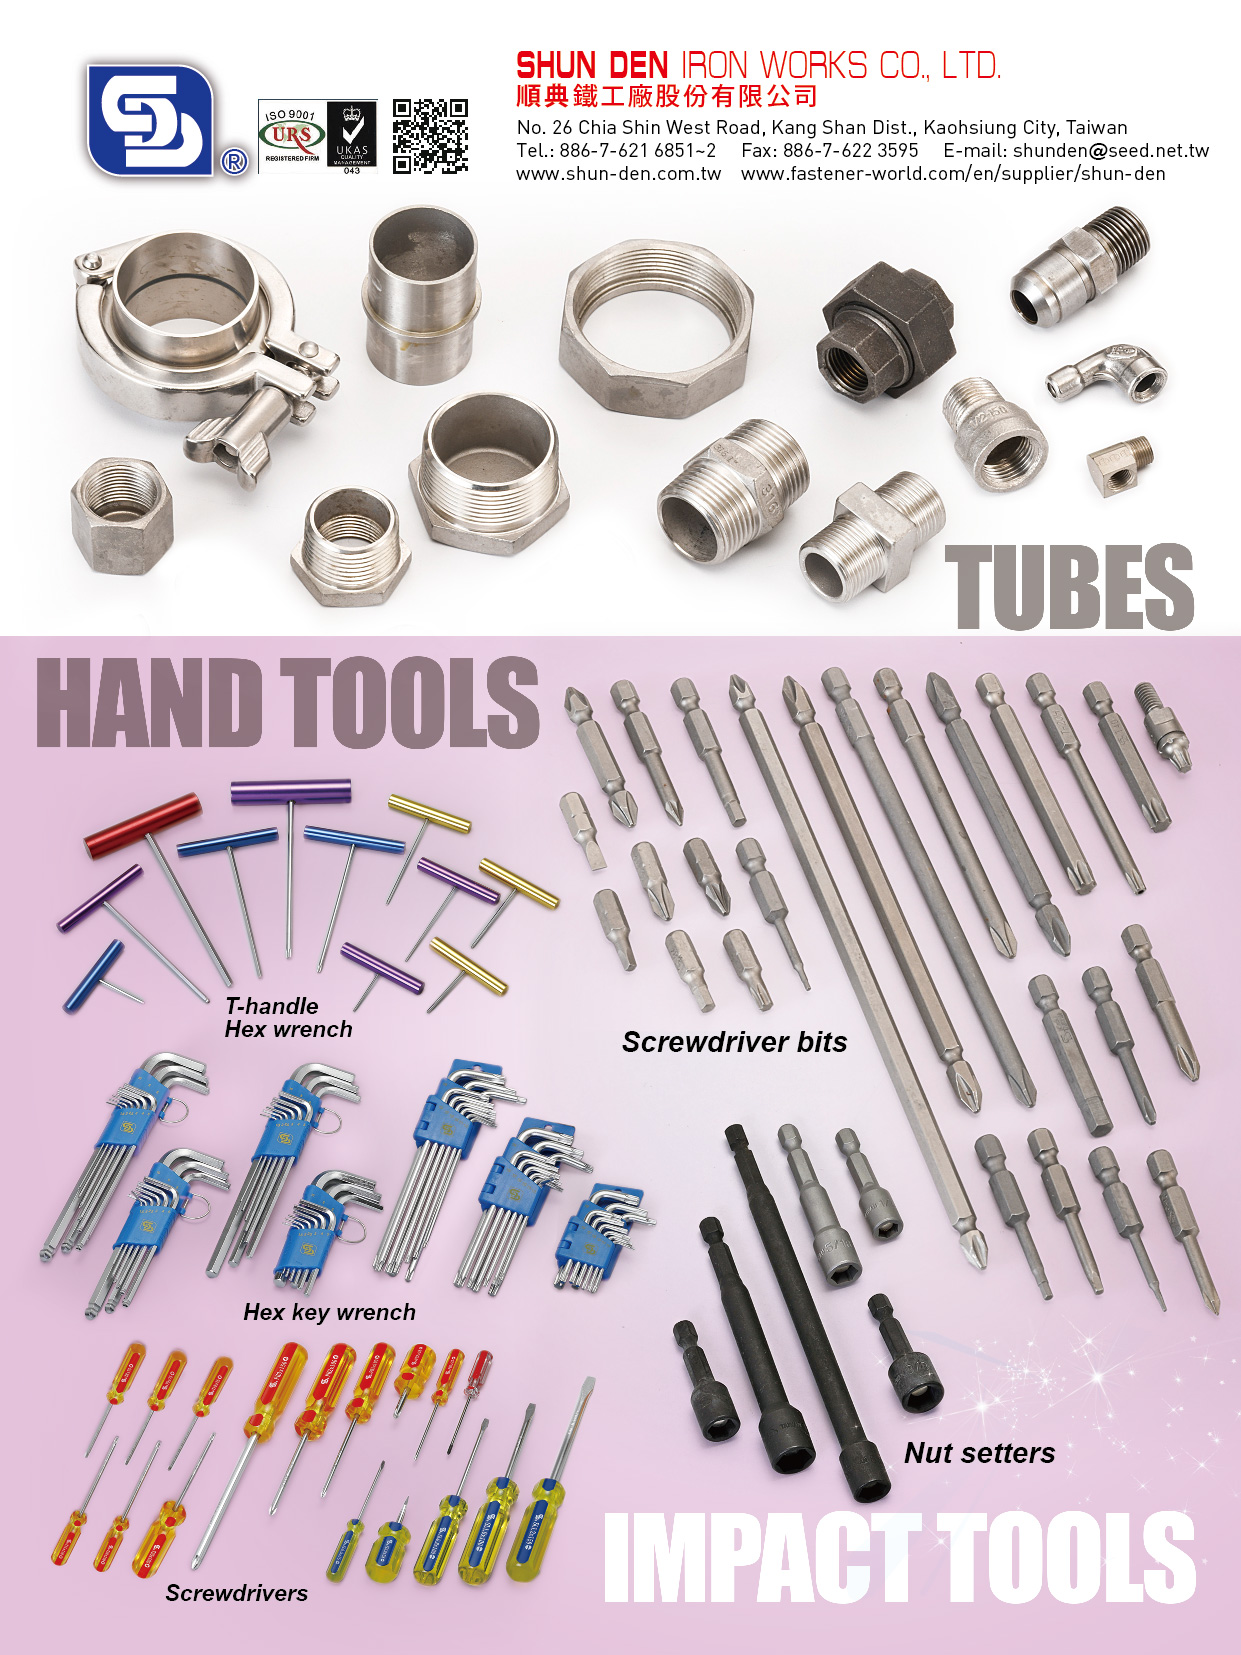 ALISHAN INTERNATIONAL GROUP CO., LTD. , Tubes/Screwdriver Bits/Hex Key Wrench/Nut Setters/Screwdrivers/T-handle Hex Wrench